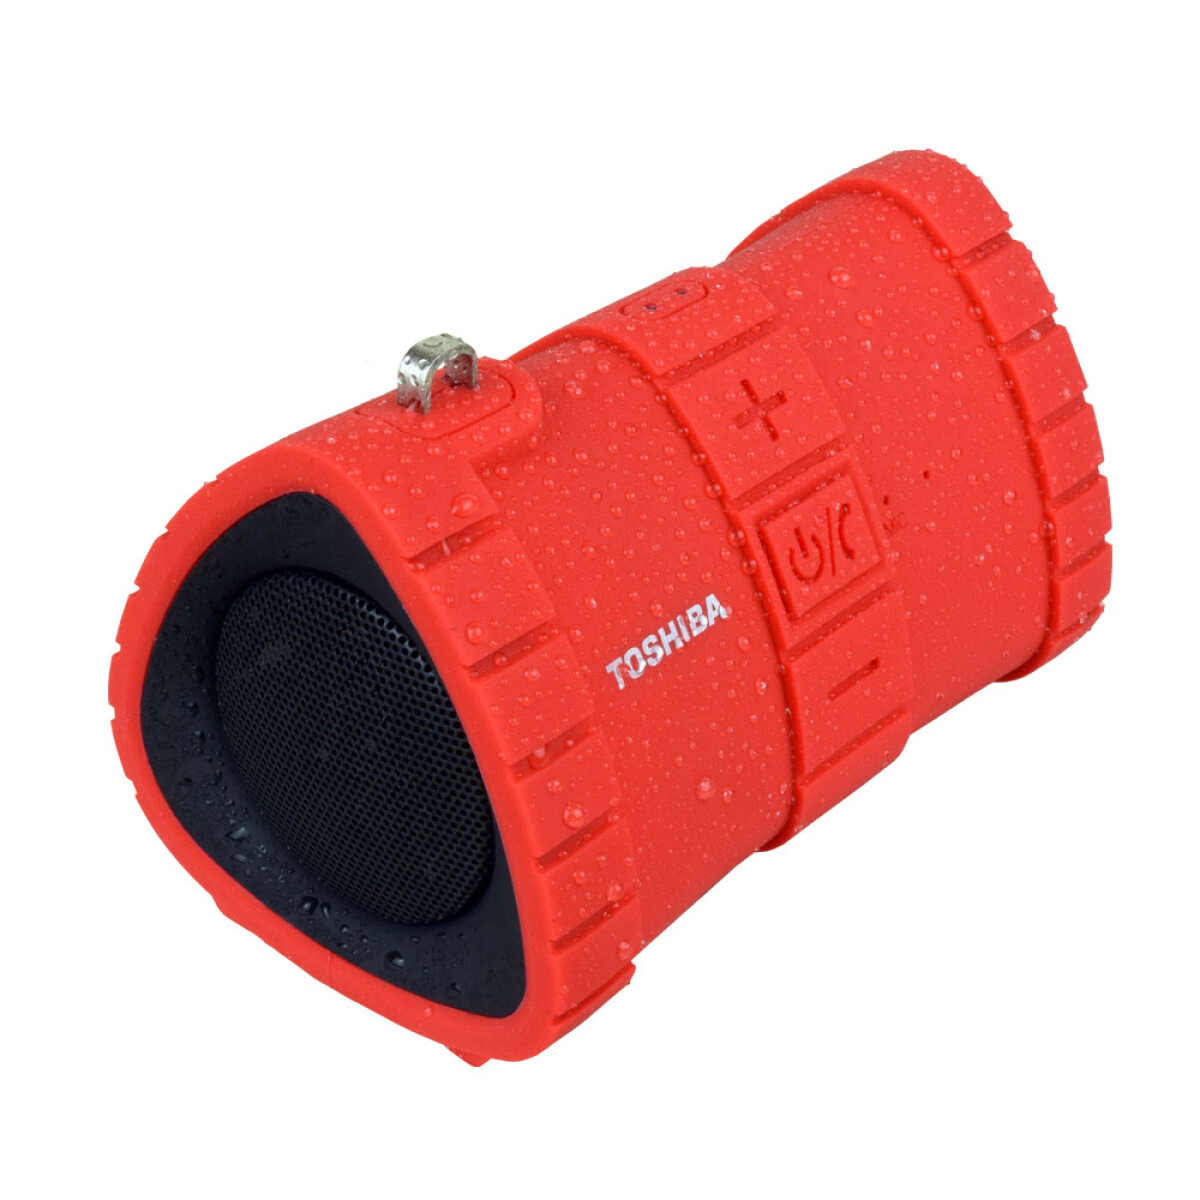 REPRODUCTOR BT TOSHIBA WATER PROOF WSP100 ROJO 